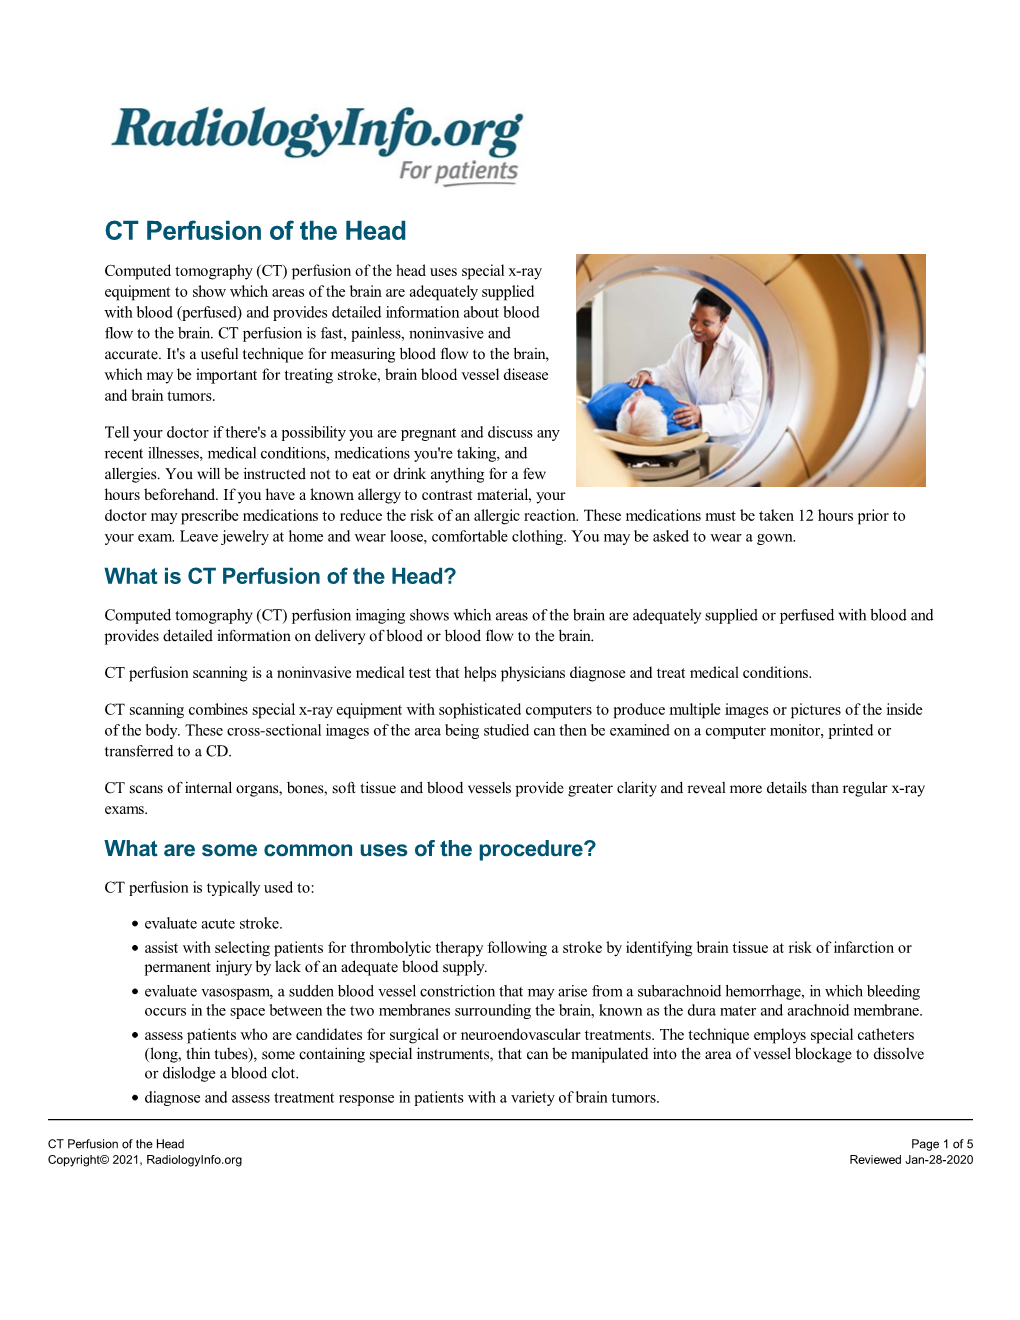 CT Perfusion of the Head